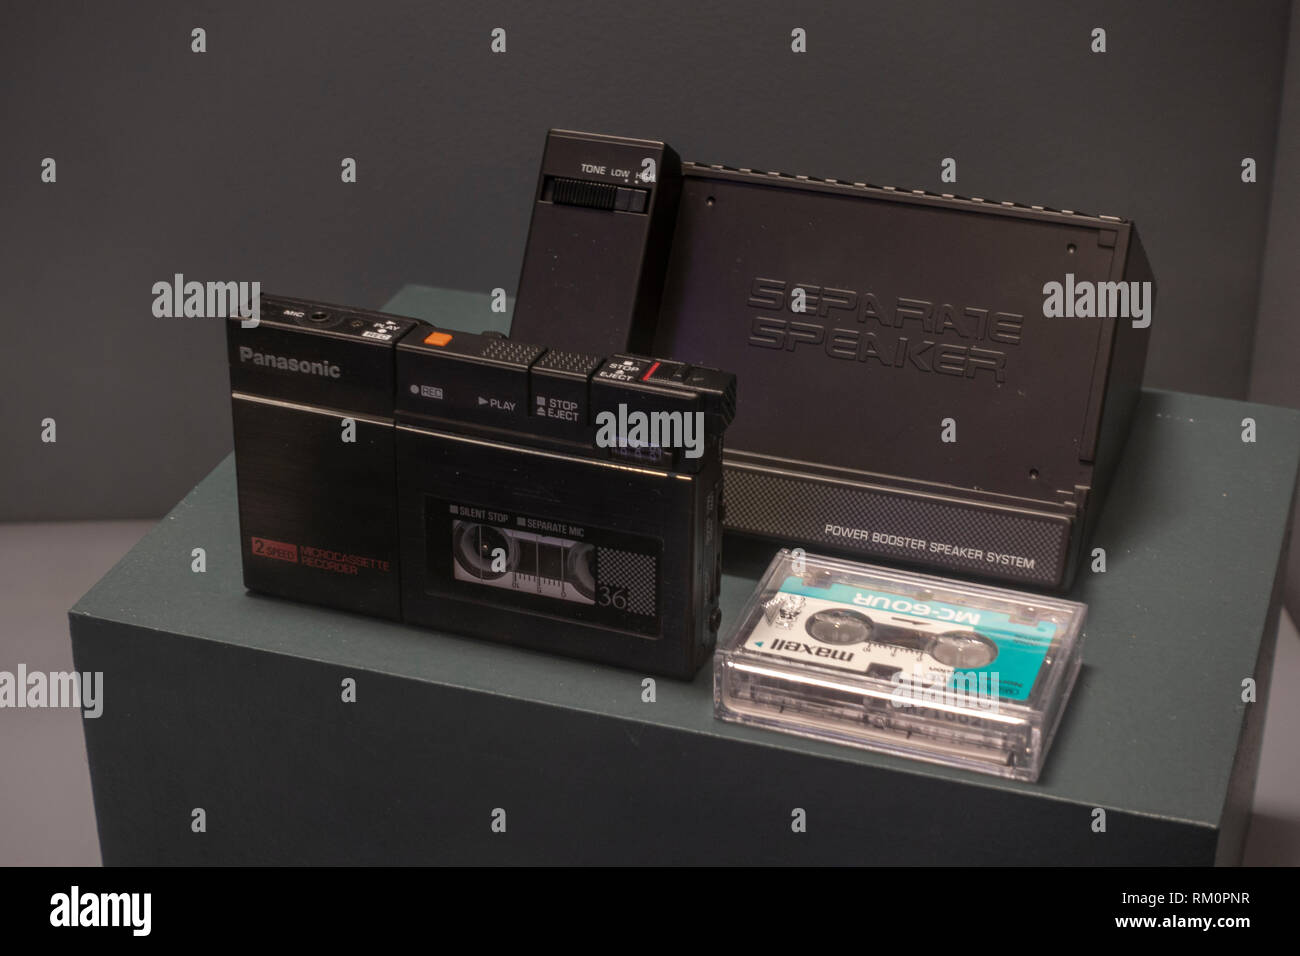 A Panasonic 2 speed microcassette recorder (RN-36), power booster speaker  system, The Mob Museum, Las Vegas, Nevada, United States Stock Photo - Alamy